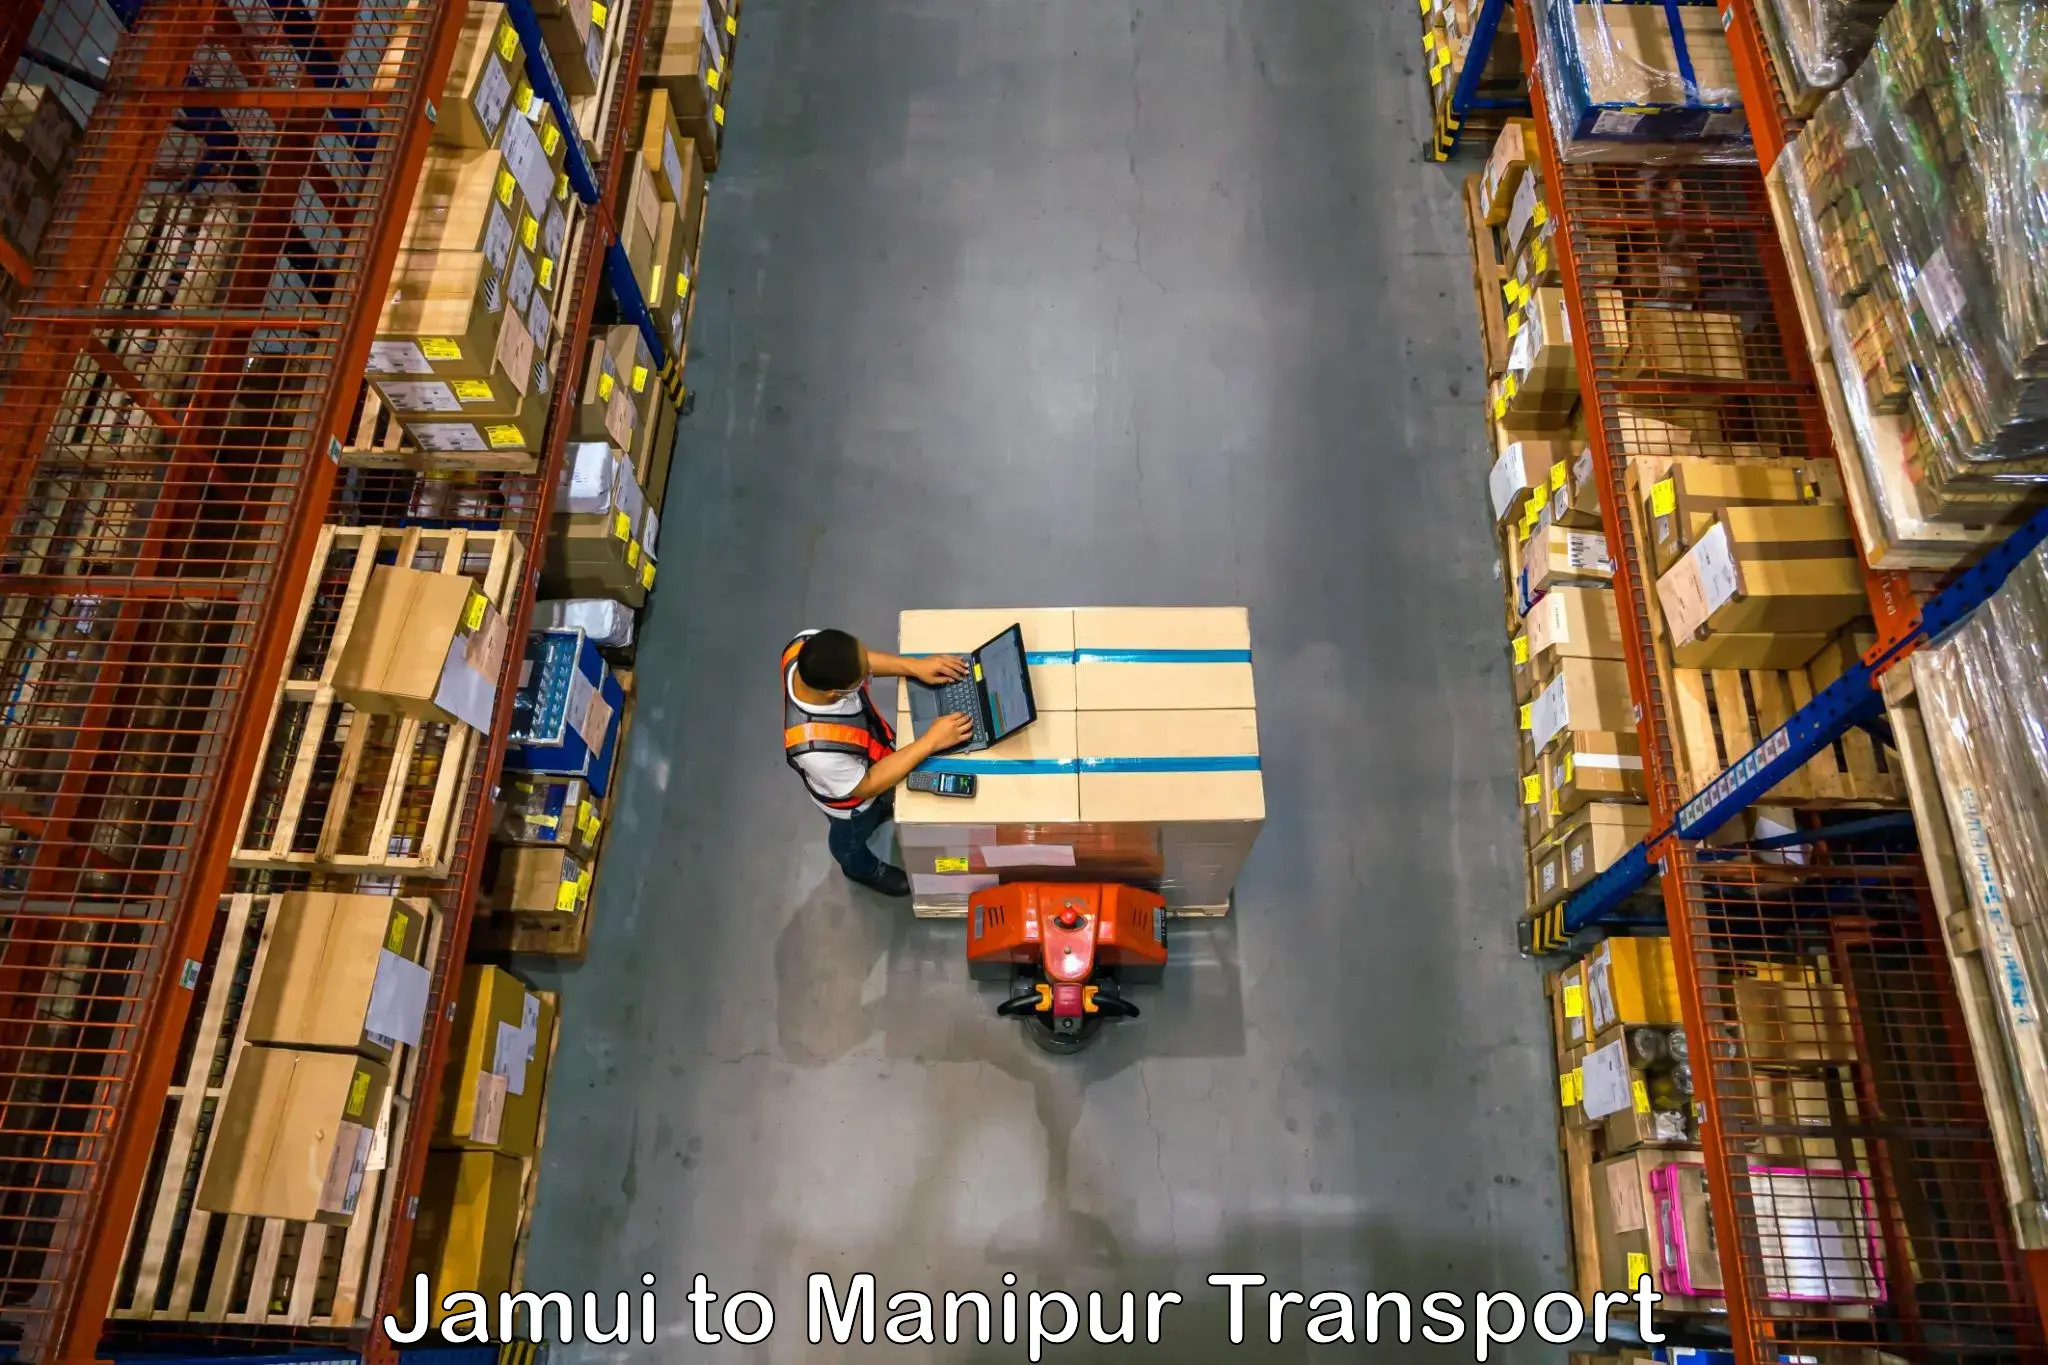 Daily transport service Jamui to Manipur